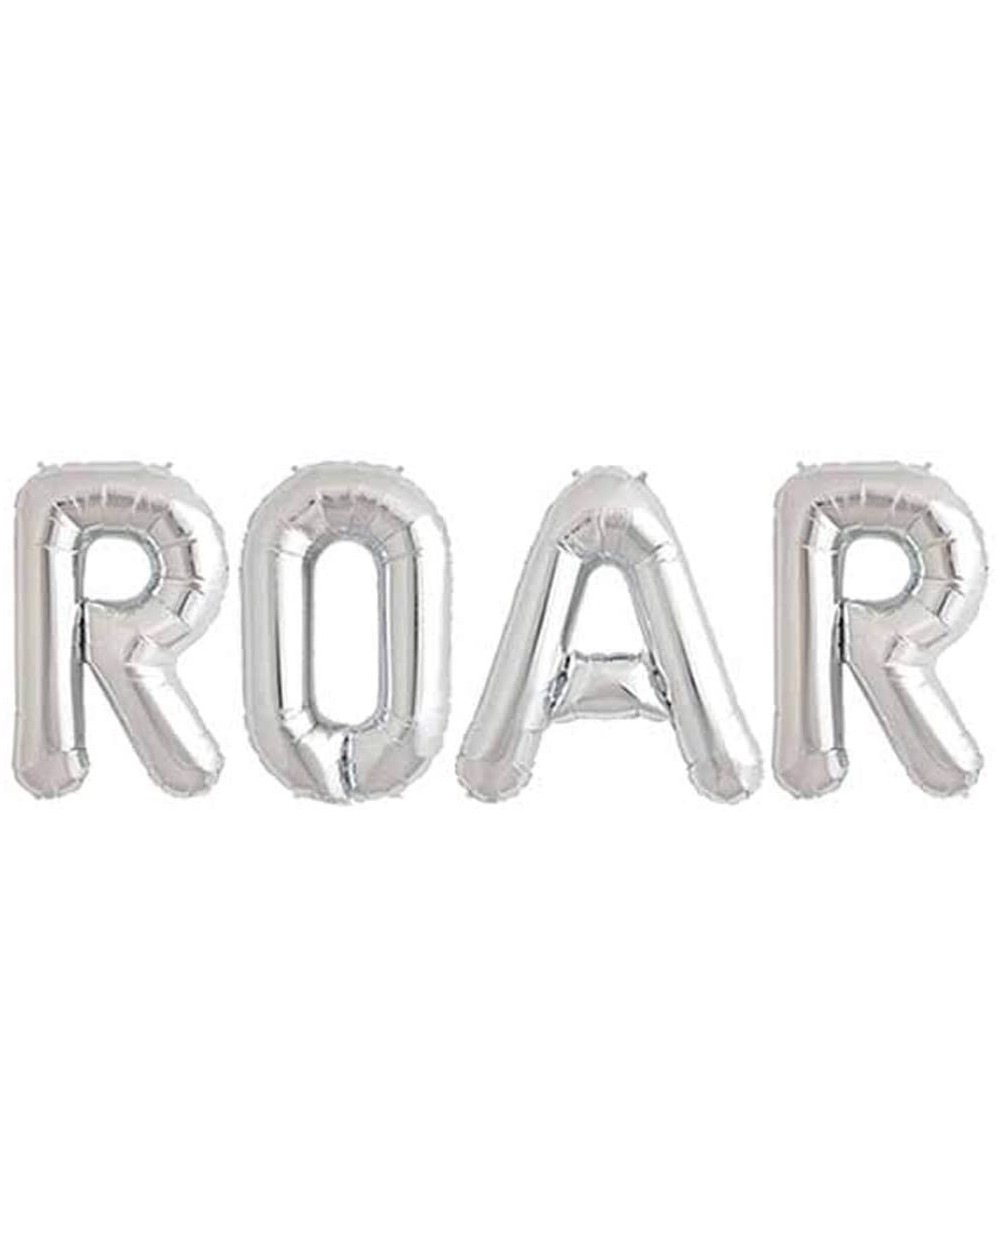 Balloons Roar Letter Balloons- Dinosaur Birthday Party Decorations- Dinosaur Hanging Wall Decor for Kids Boy- Silver - Silver...